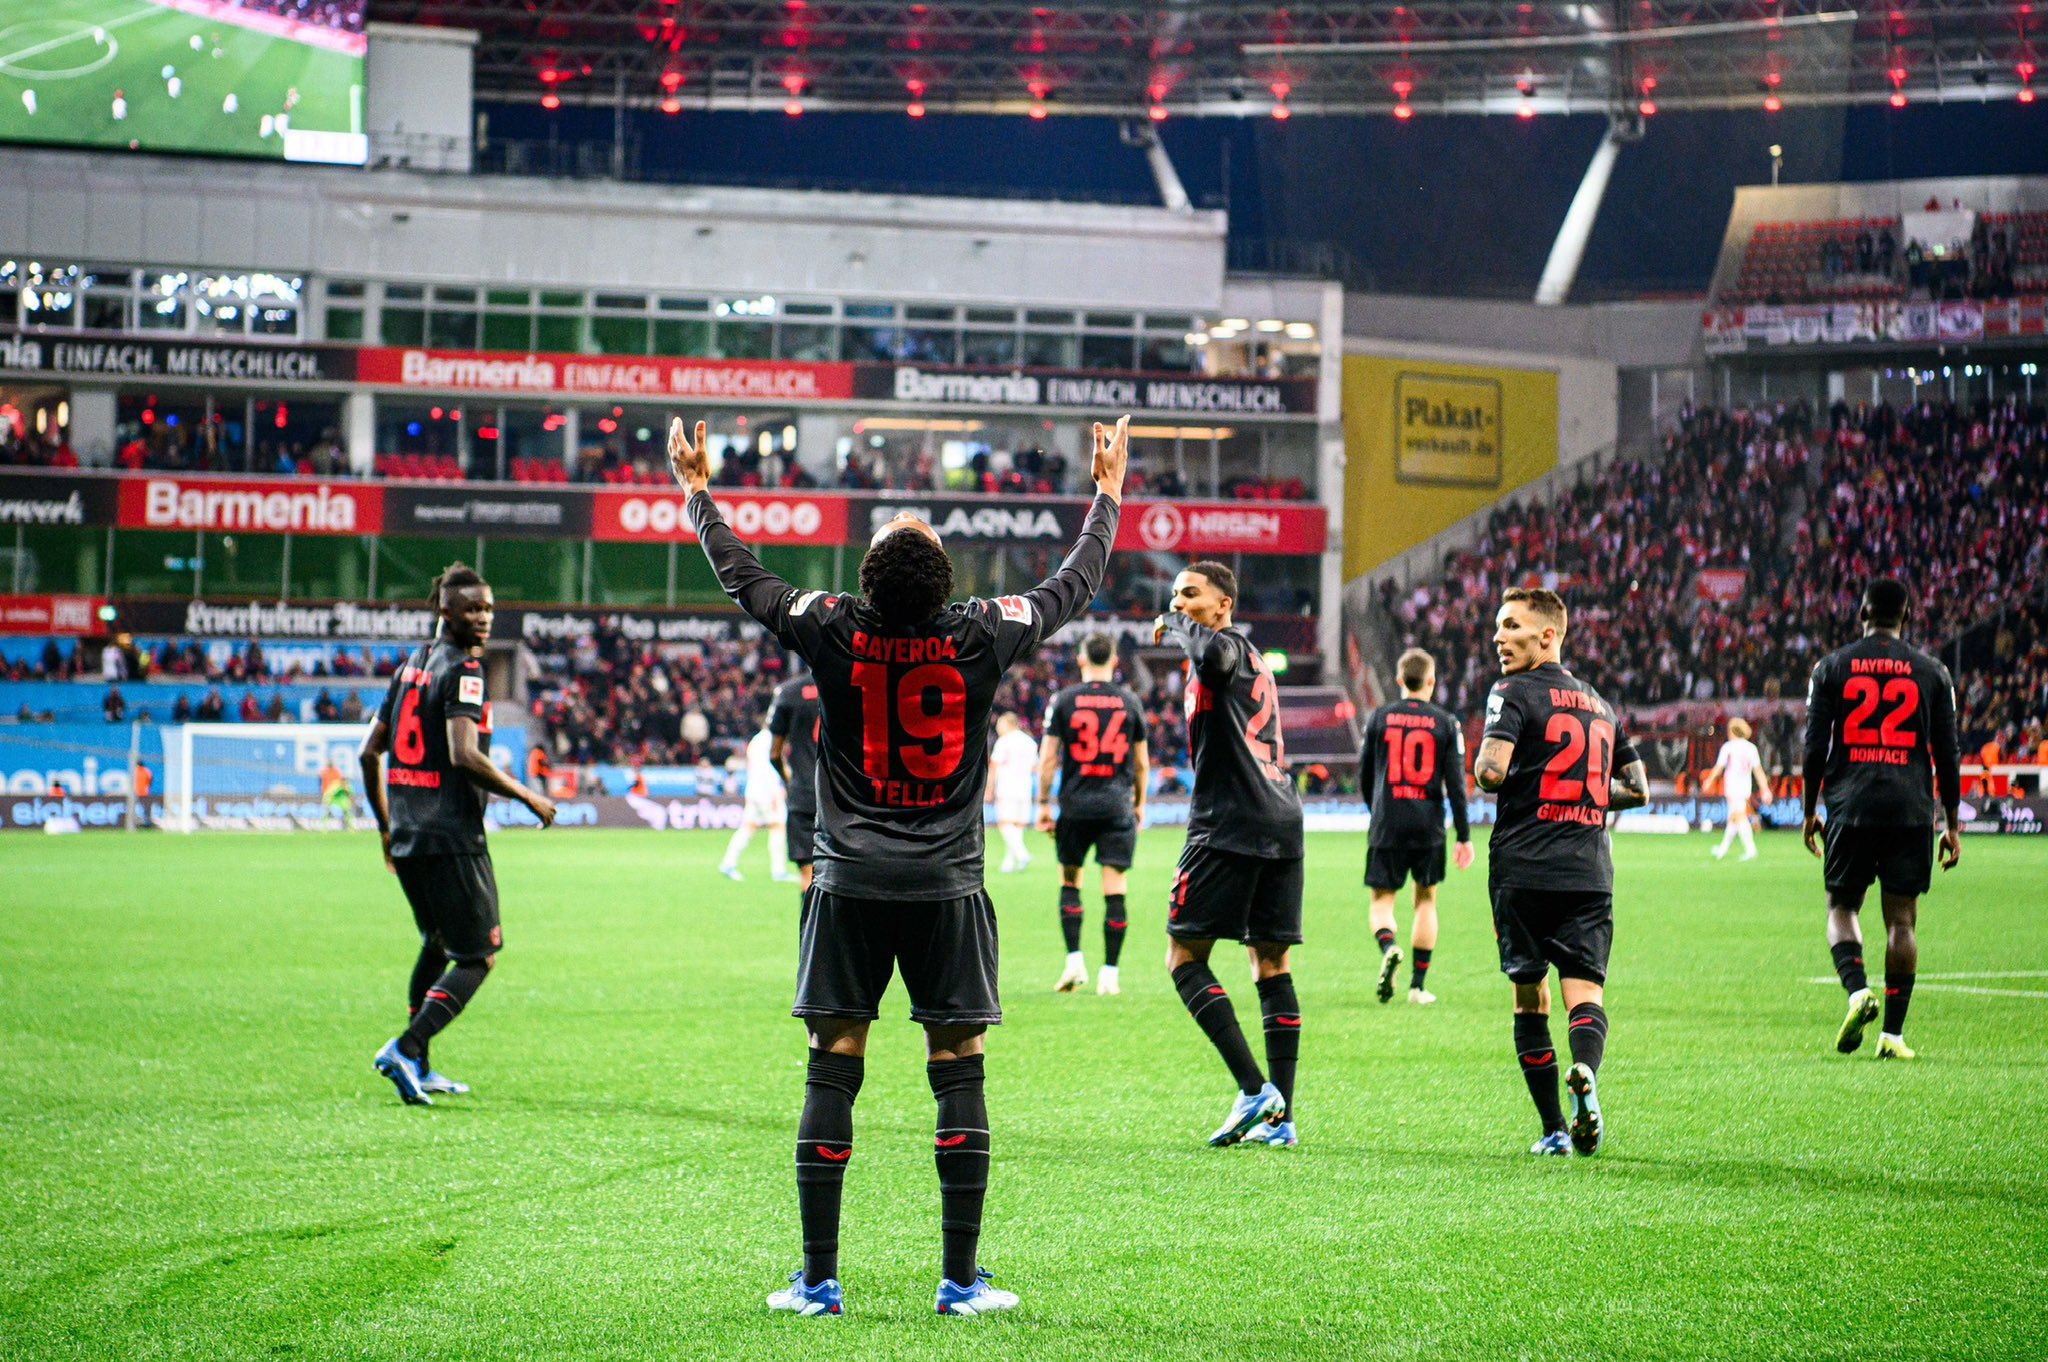 “That’s a success story” – Bayer Leverkusen’s sporting director hails Nathan Tella’s Fortitude